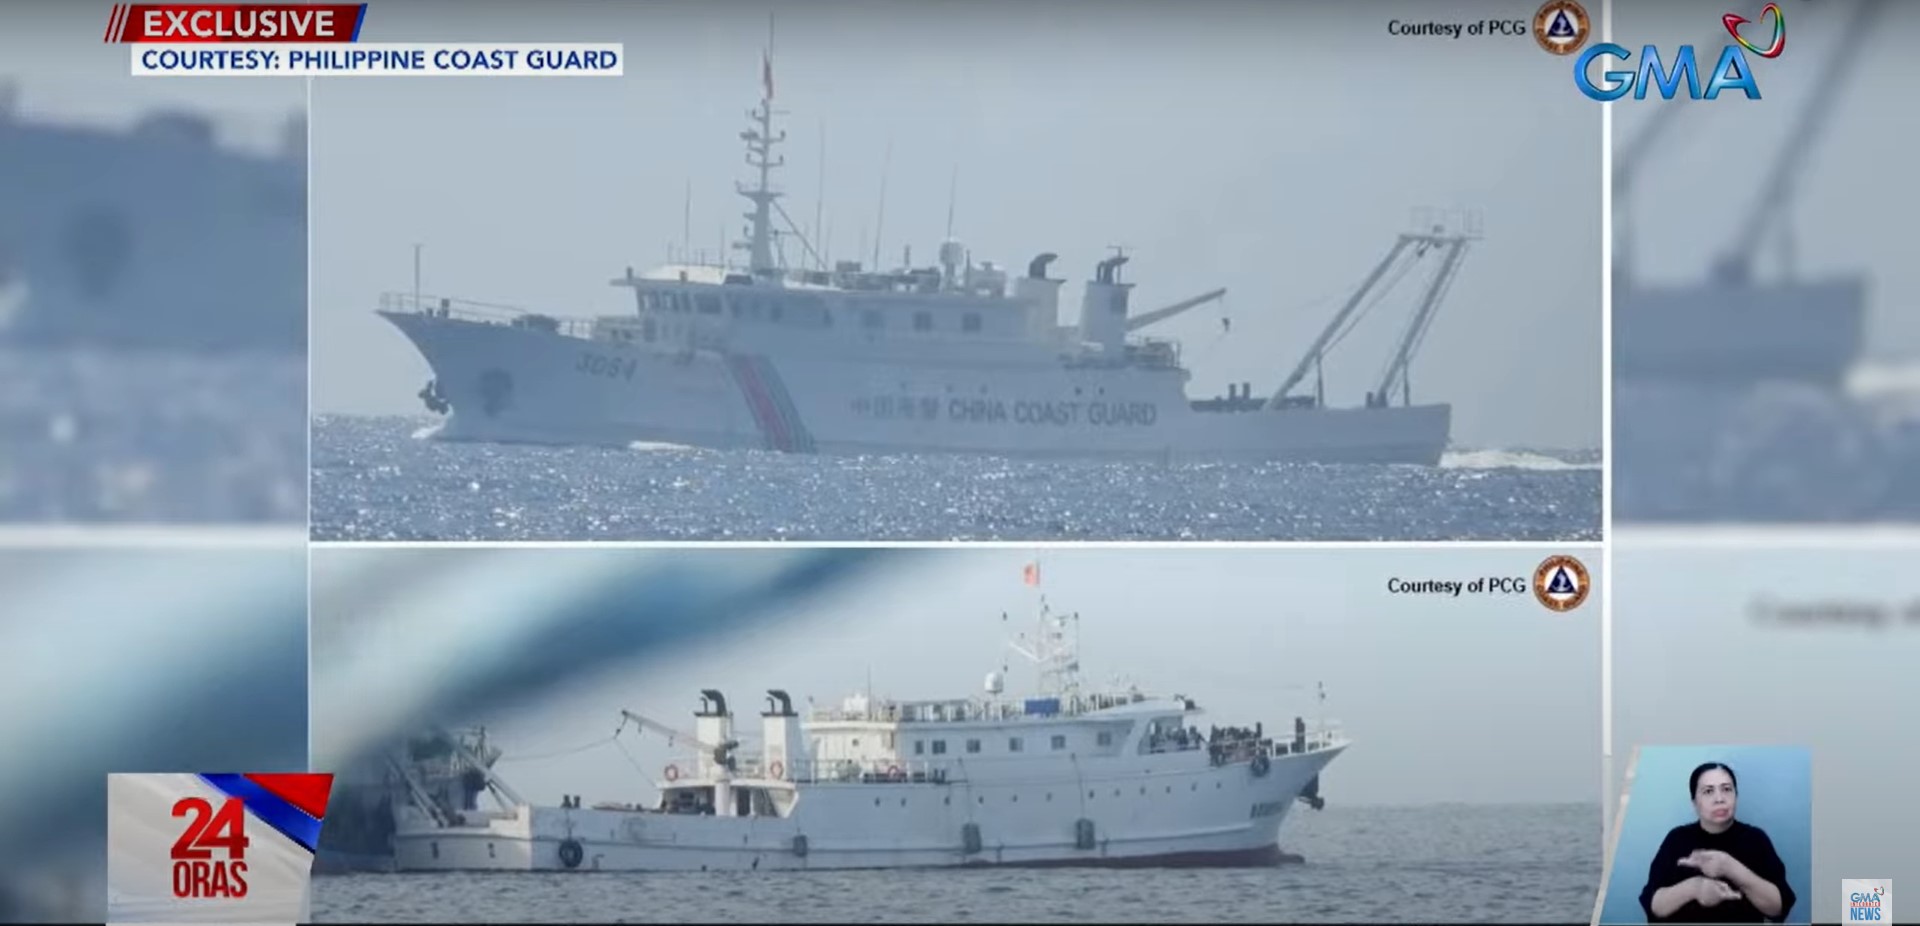 chinese militia boats painted white to look like coast guard —pcg